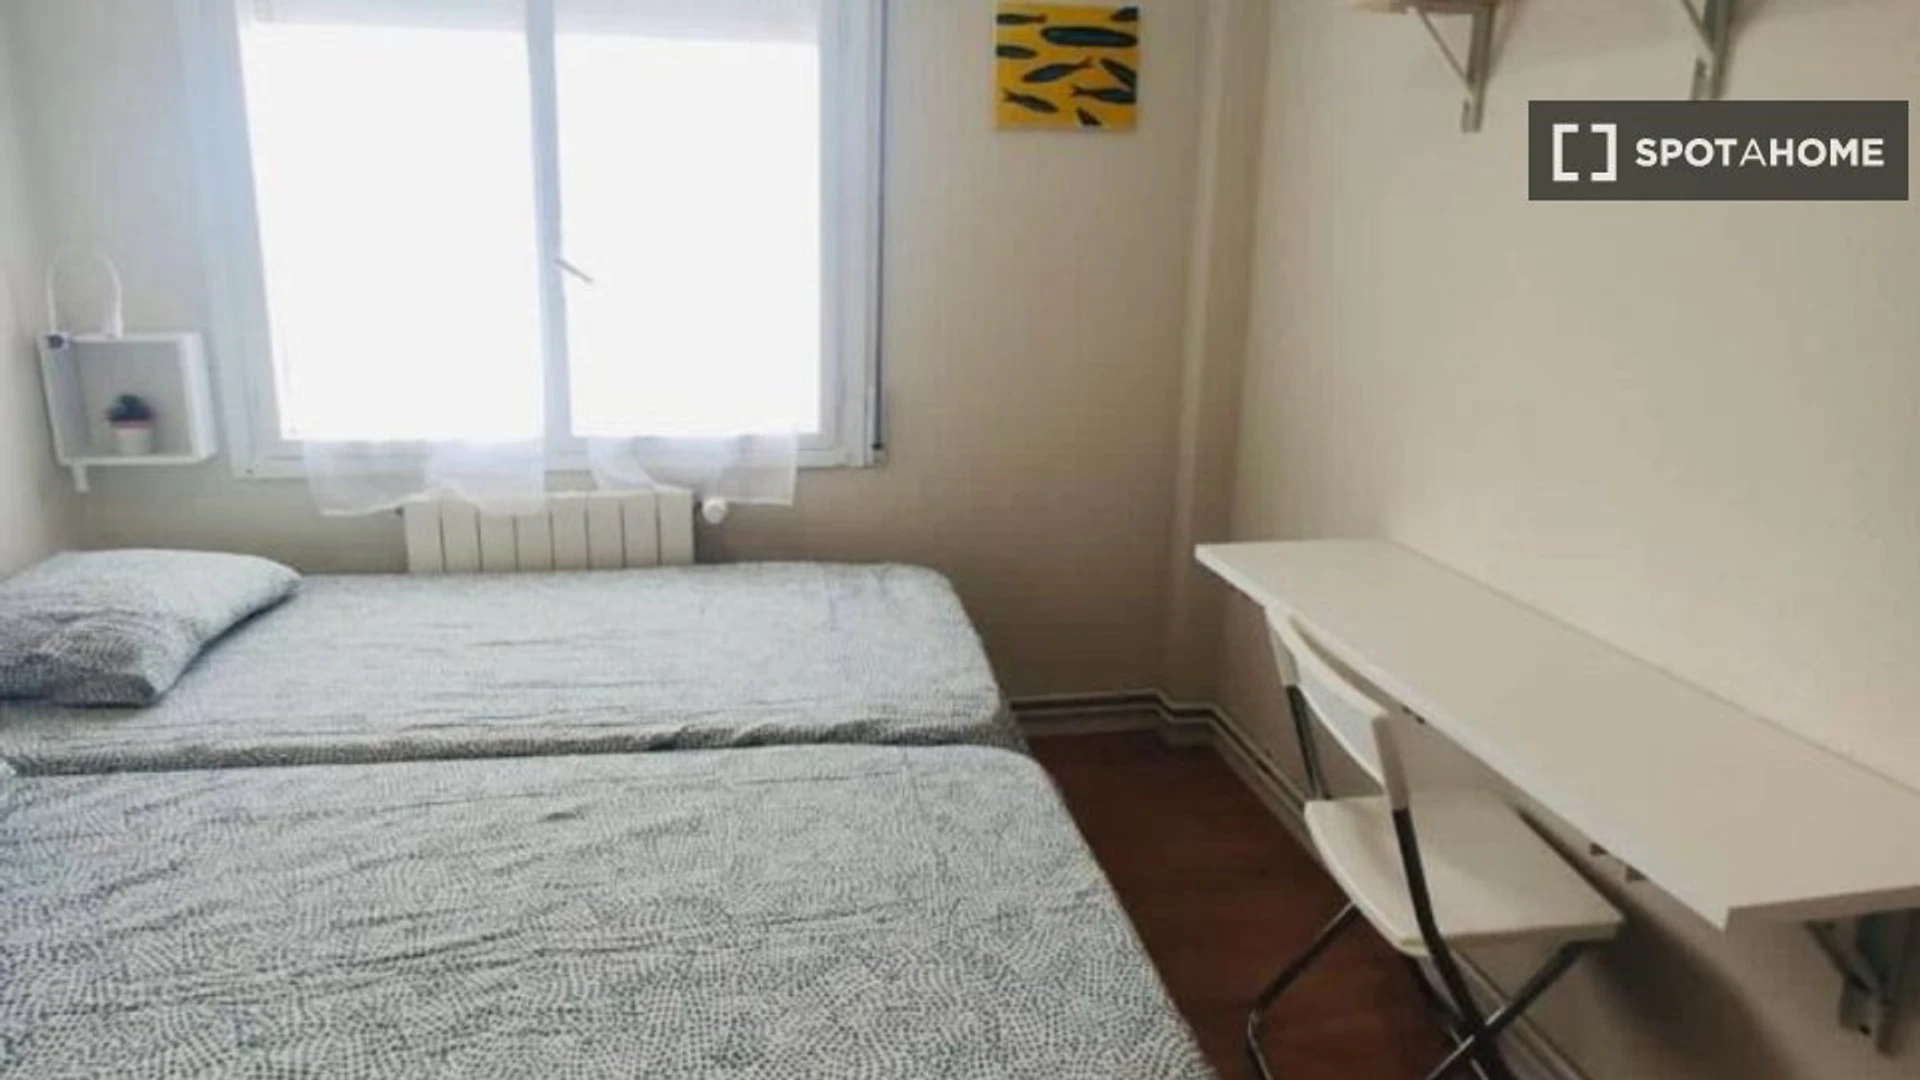 Room for rent in a shared flat in Santander